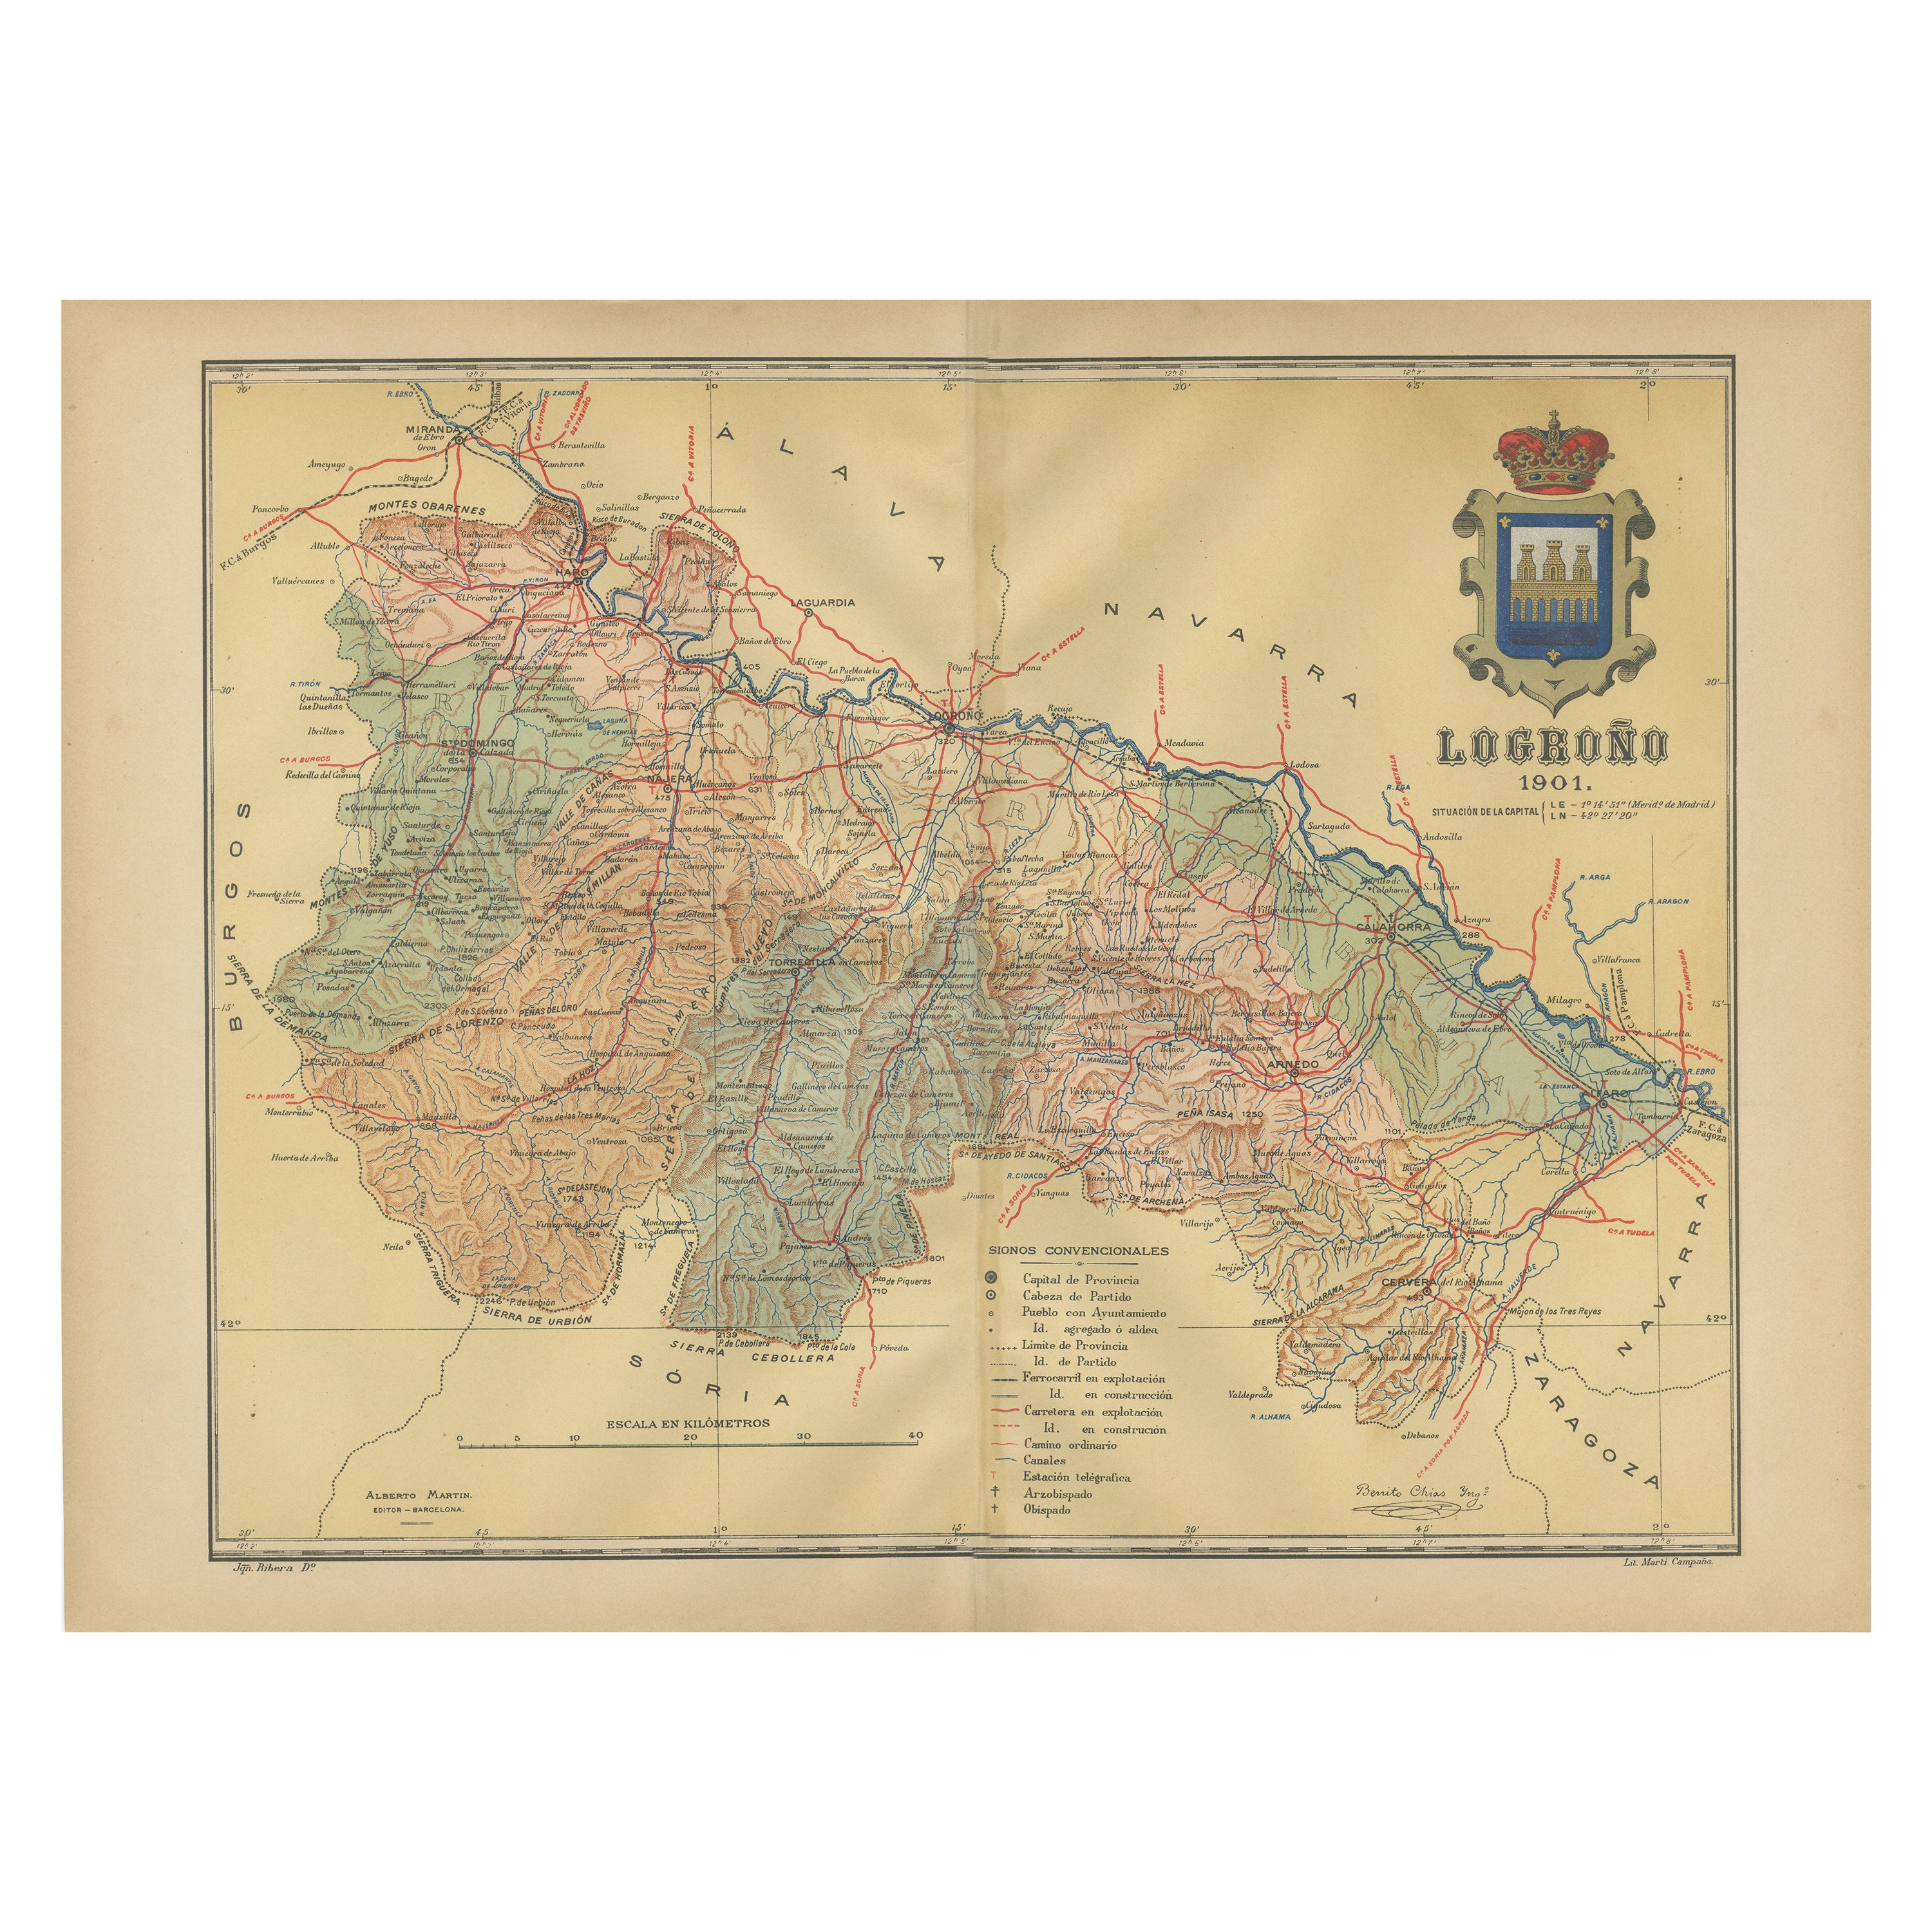 La Rioja 1901: A Cartographic Journey Through Spain's Renowned Wine Country For Sale